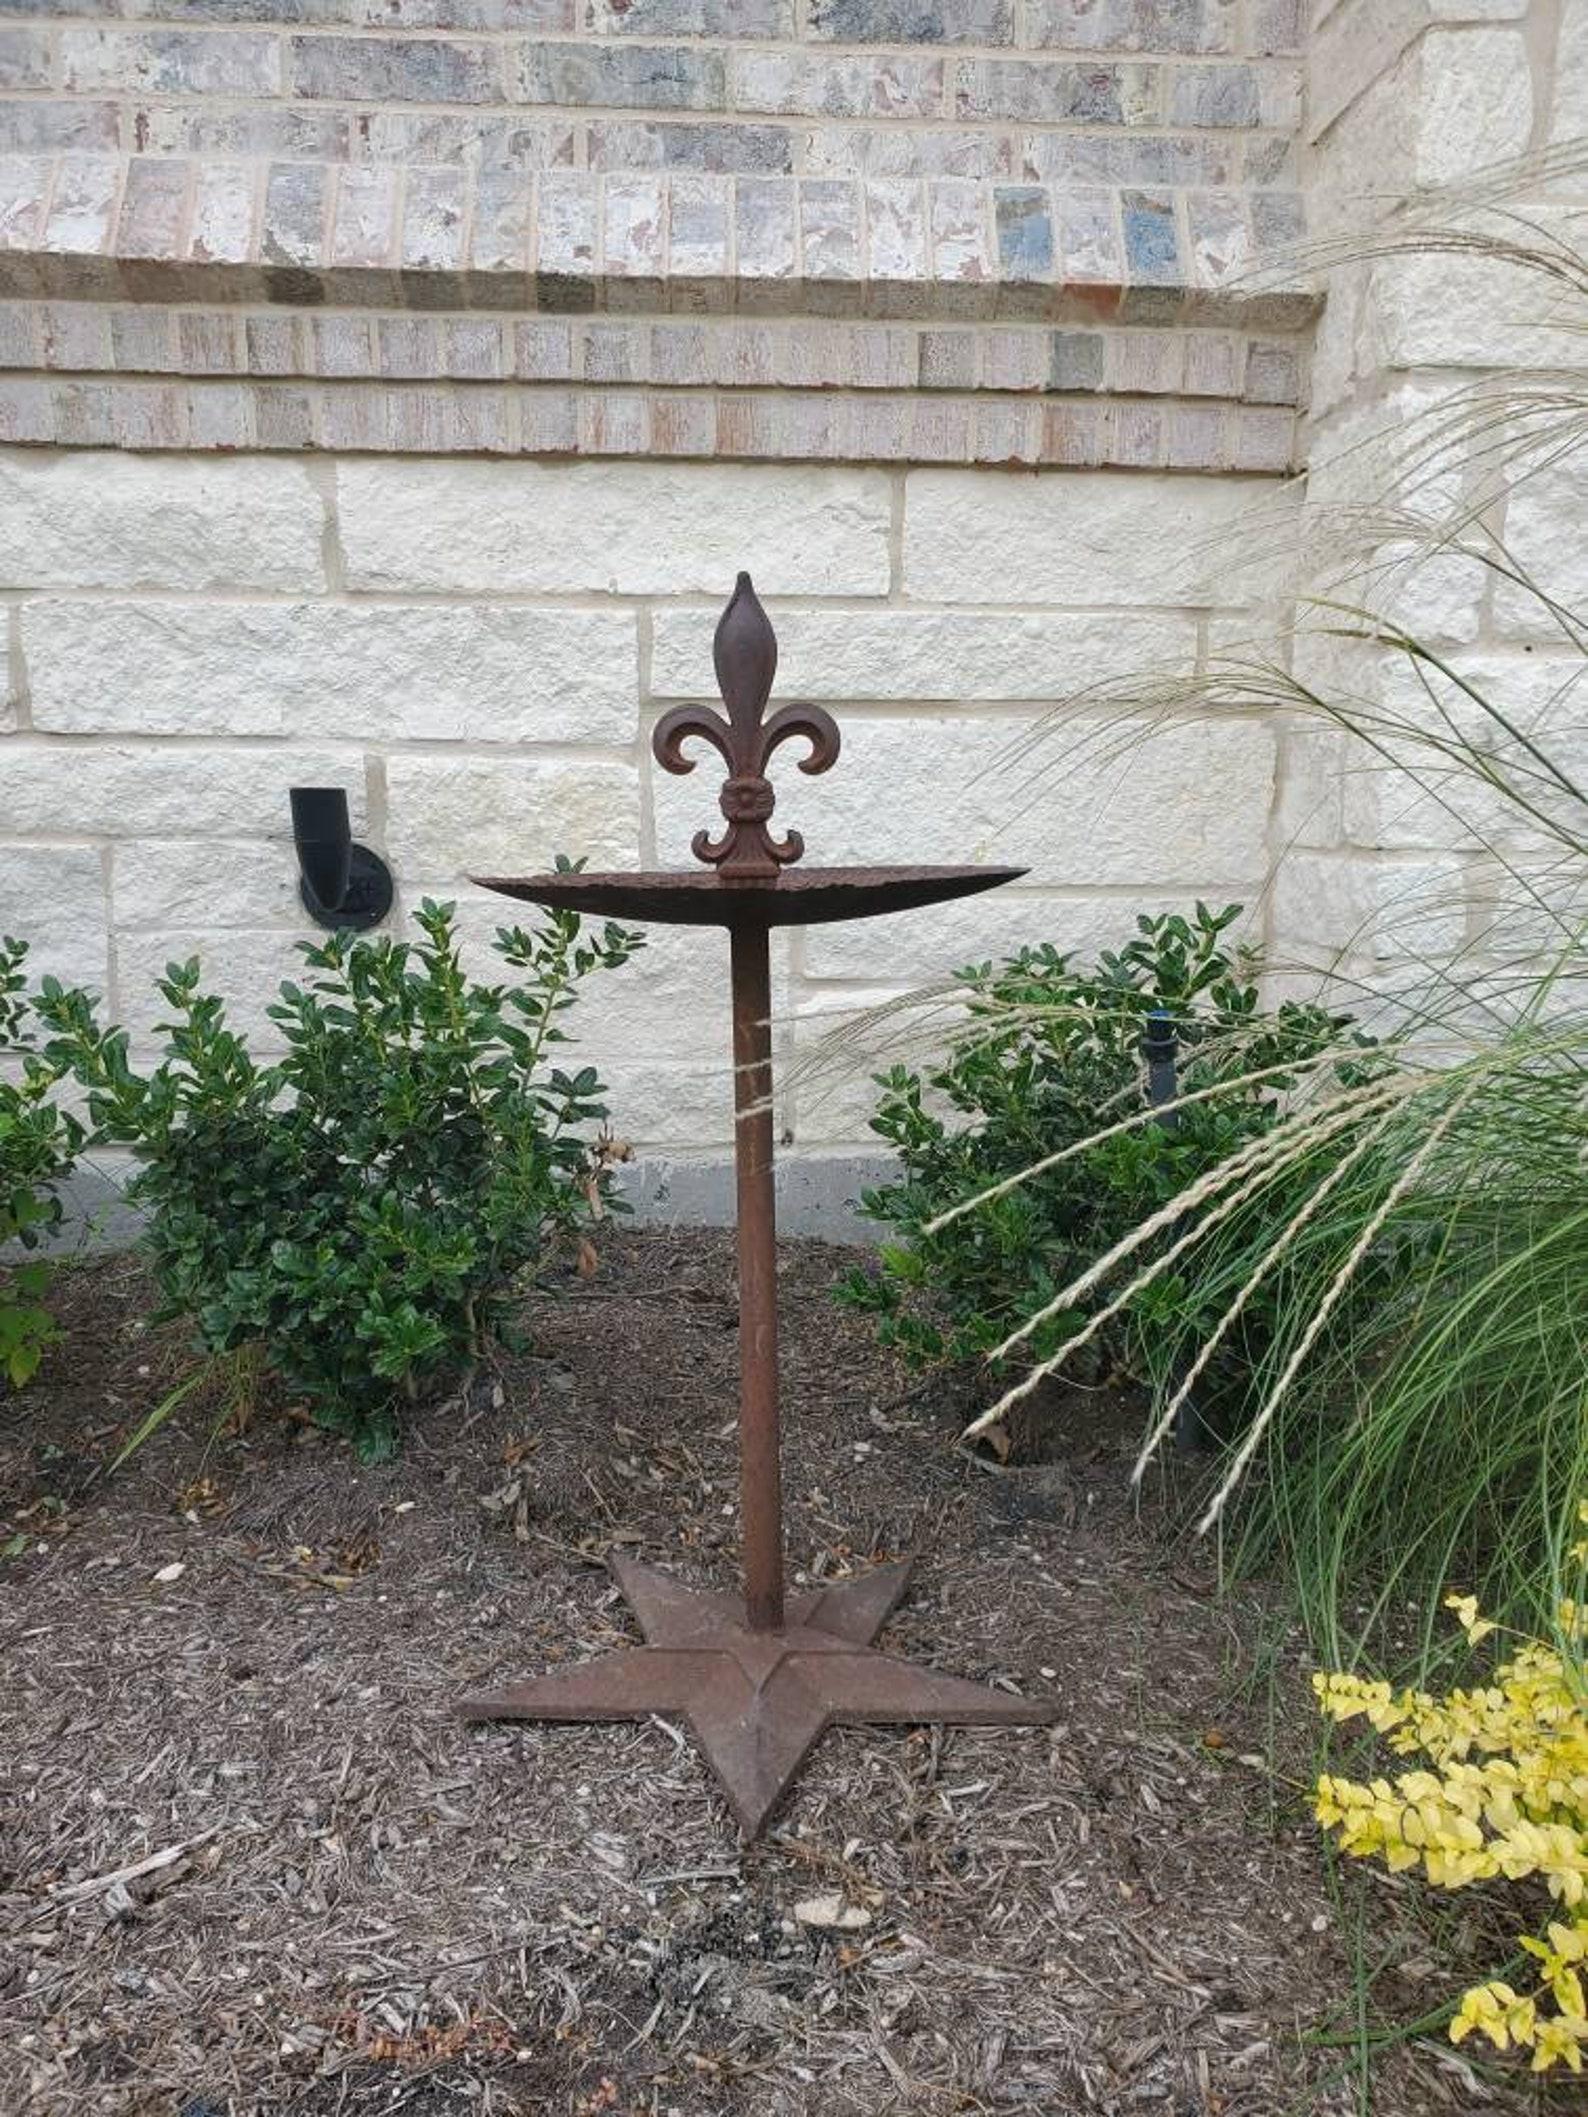 Antique Garden Ornament from Architectural Salvaged Elements 4